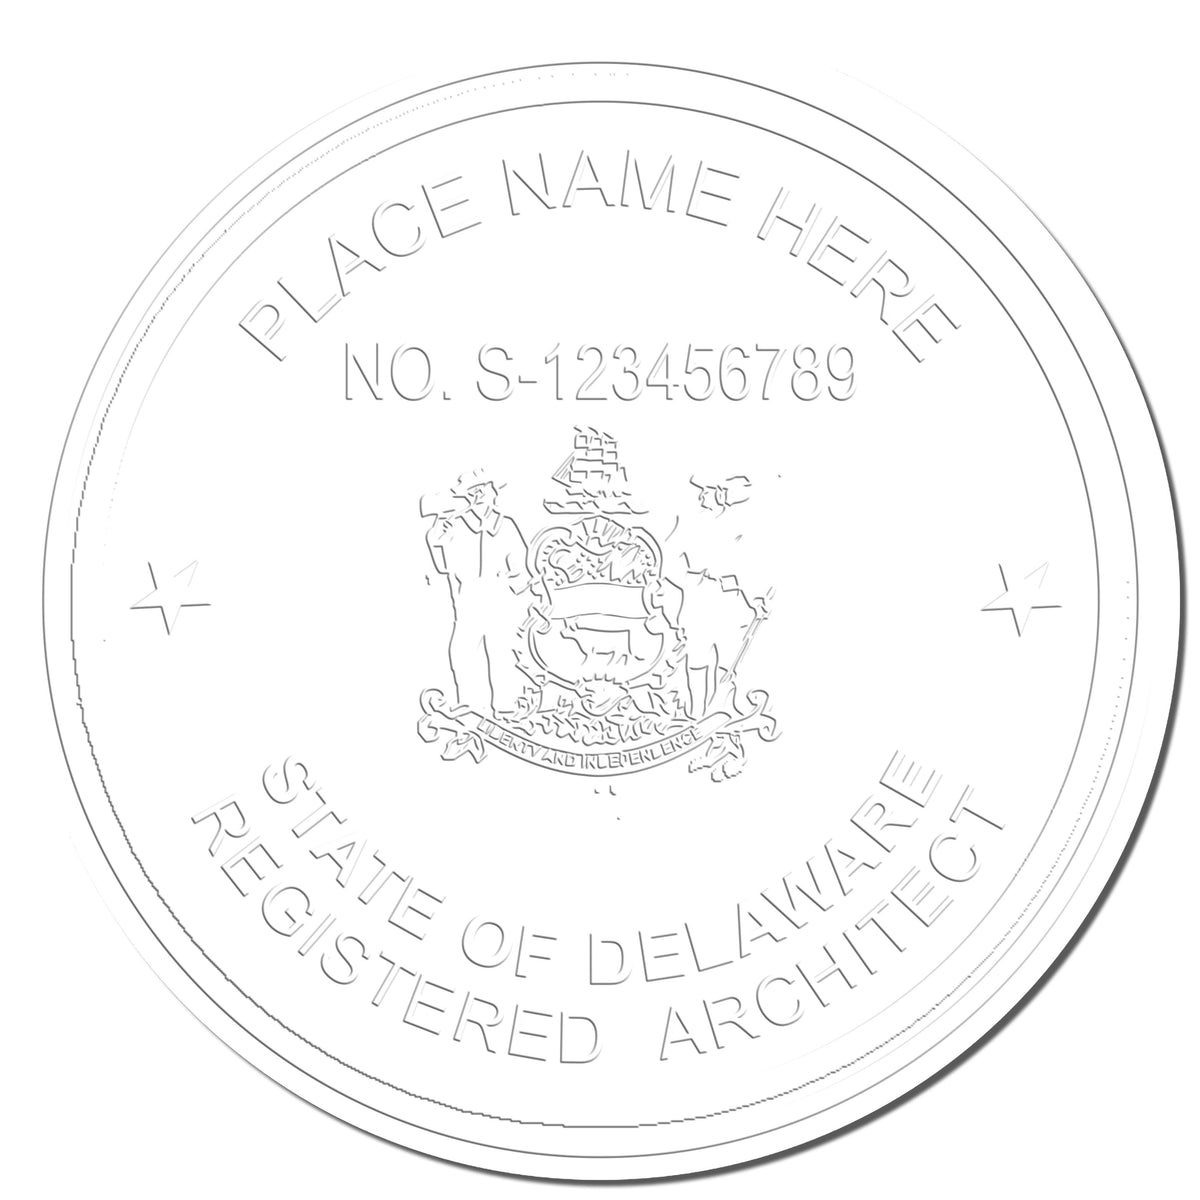 This paper is stamped with a sample imprint of the Hybrid Delaware Architect Seal, signifying its quality and reliability.